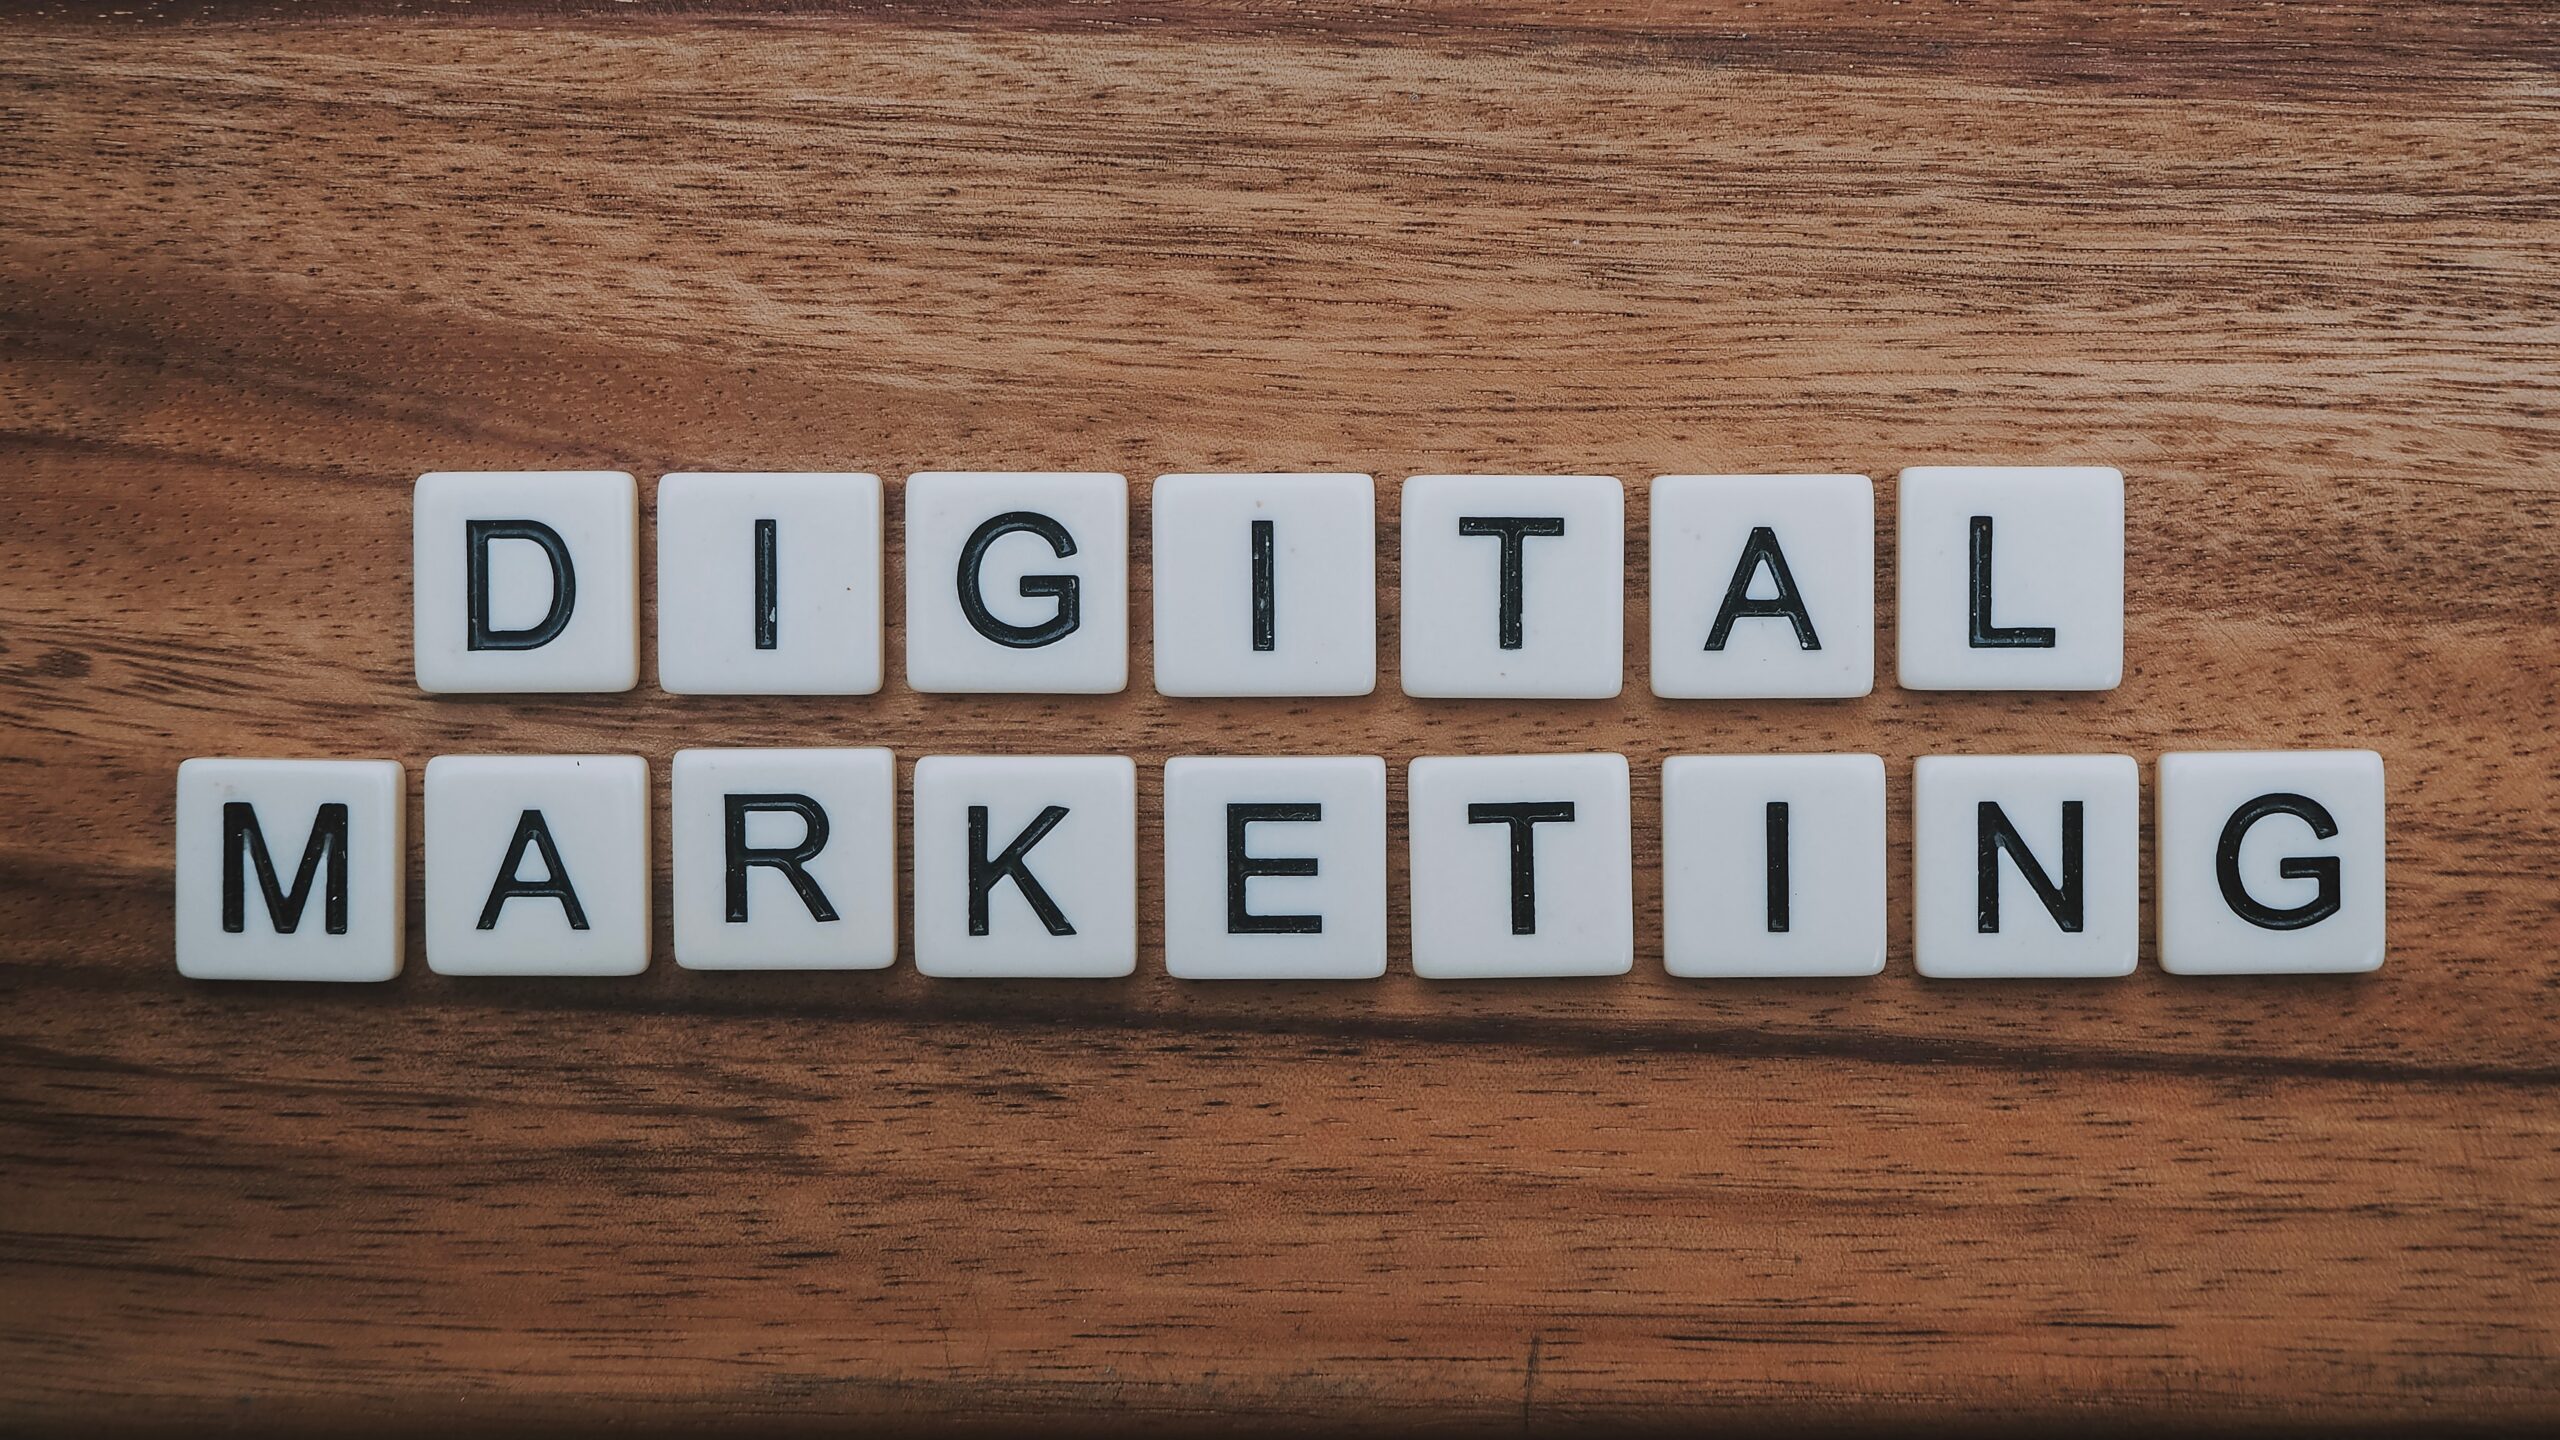 digital marketing for small businesses